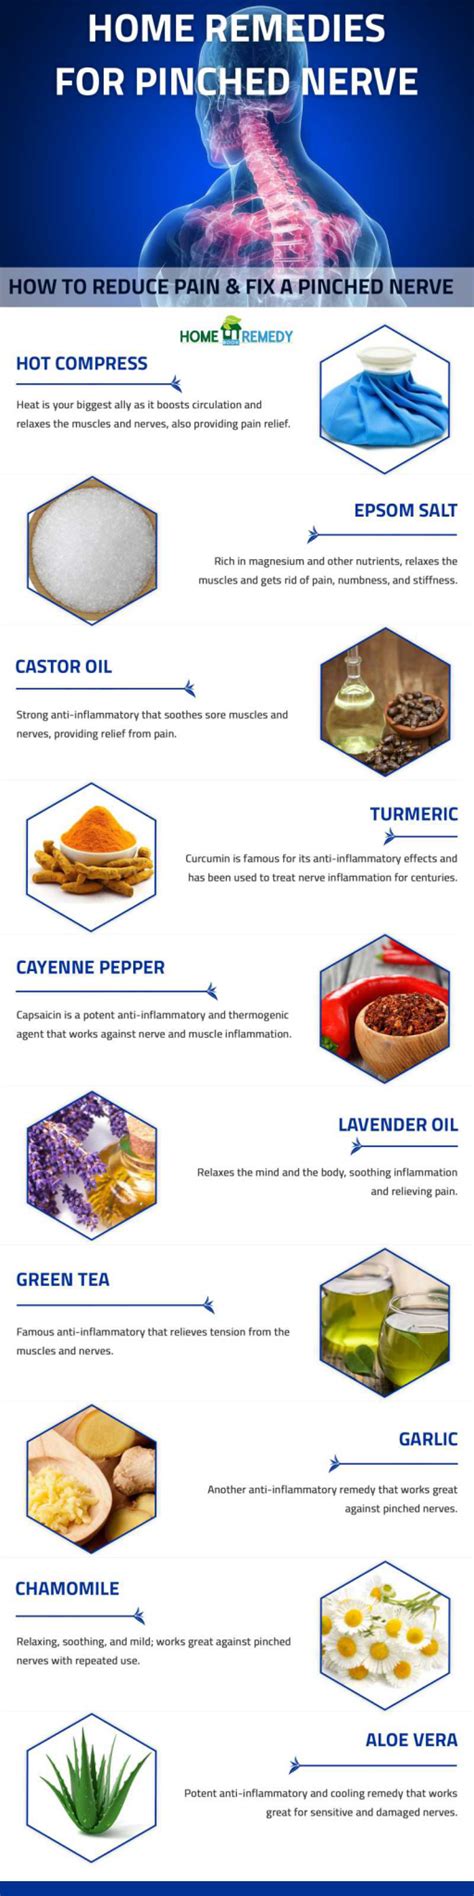 14 Home Remedies For Pinched Nerve Infographic